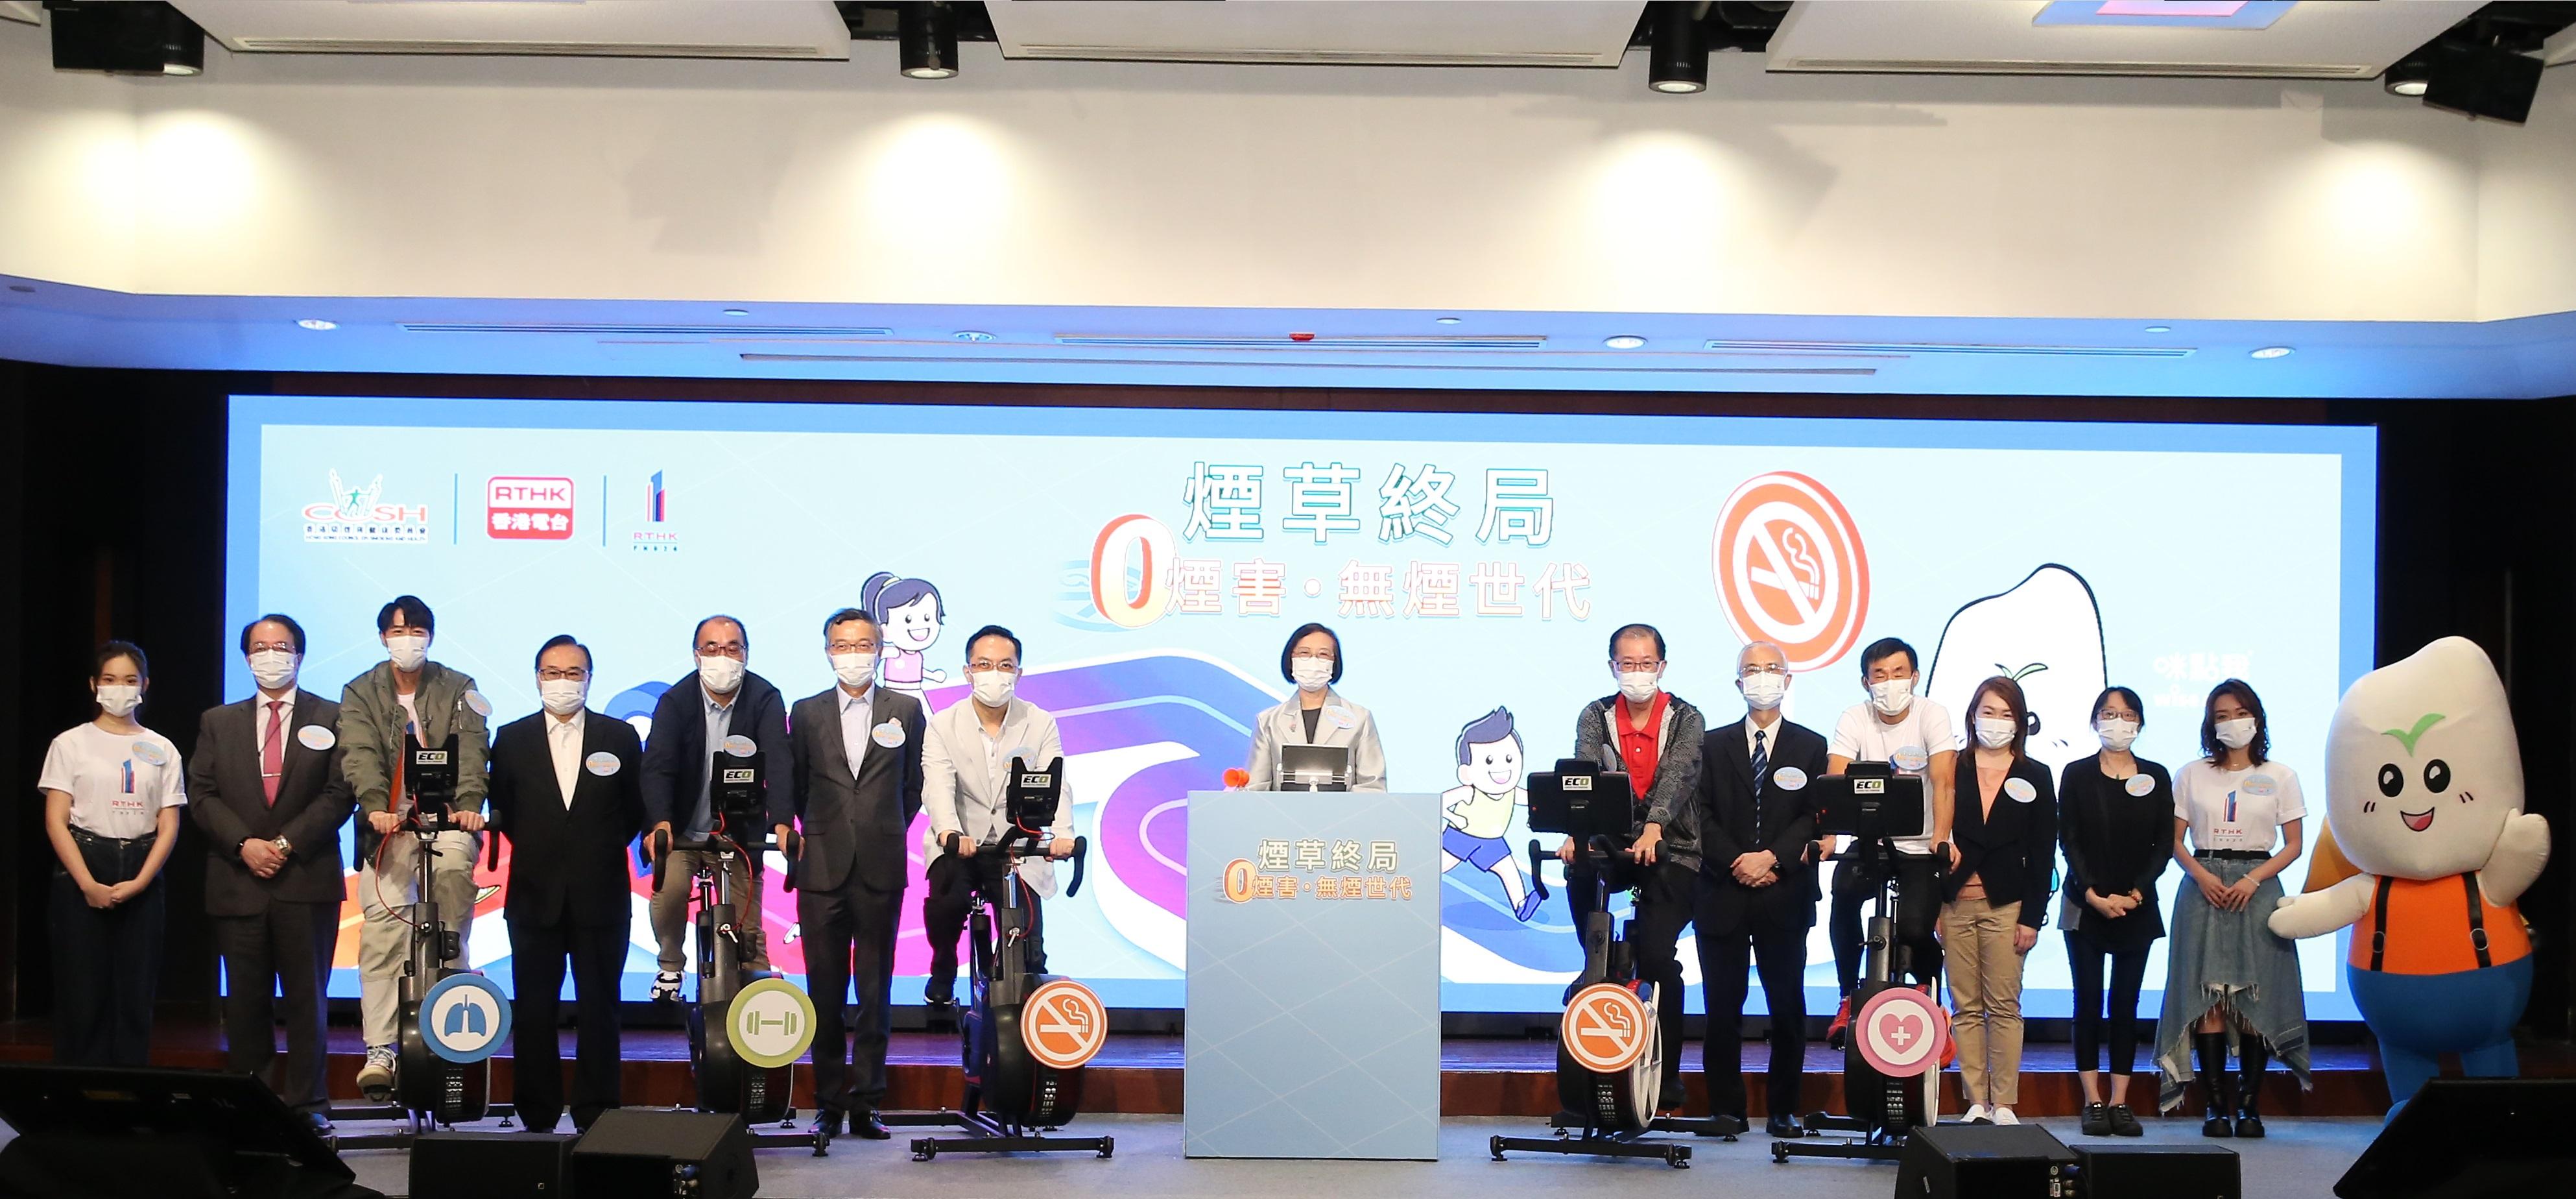 Attending the kick-off ceremony of the smoke-free publicity programme for World No Tobacco Day organised by the Hong Kong Council on Smoking and Health today (May 24), the Secretary for Food and Health, Professor Sophia Chan (centre); the Director of Health, Dr Ronald Lam (seventh left); and the Chairman of the Hong Kong Council on Smoking and Health, Mr Henry Tong (seventh right), call on smokers to quit smoking in order to reduce their risk of tobacco-related diseases and death.